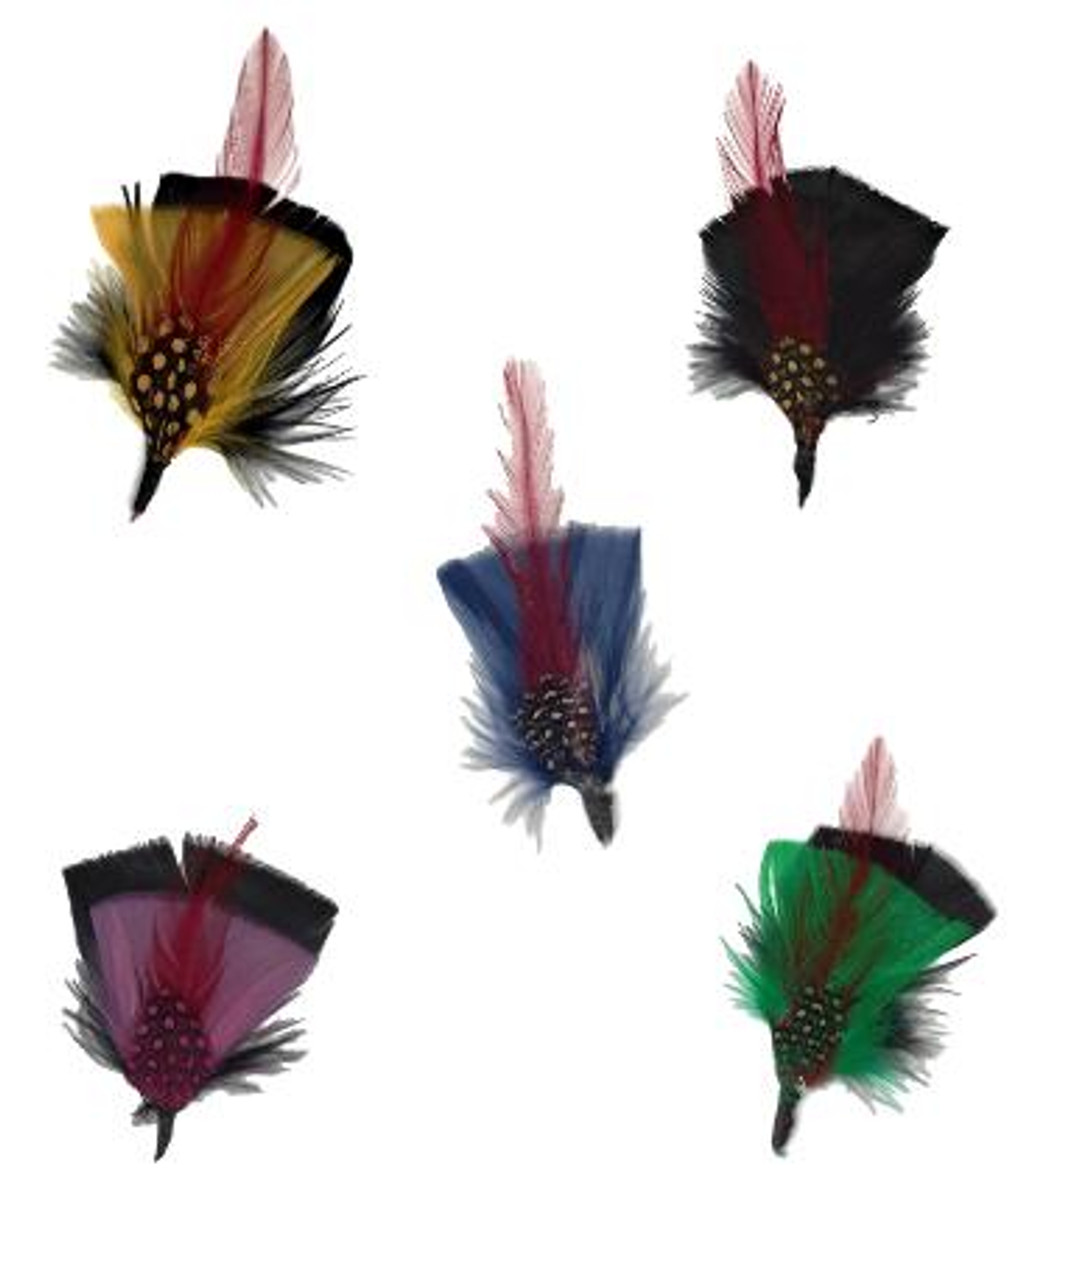 20 Pcs Hat Feathers Assorted Feathers for Fedora Hats Colorful